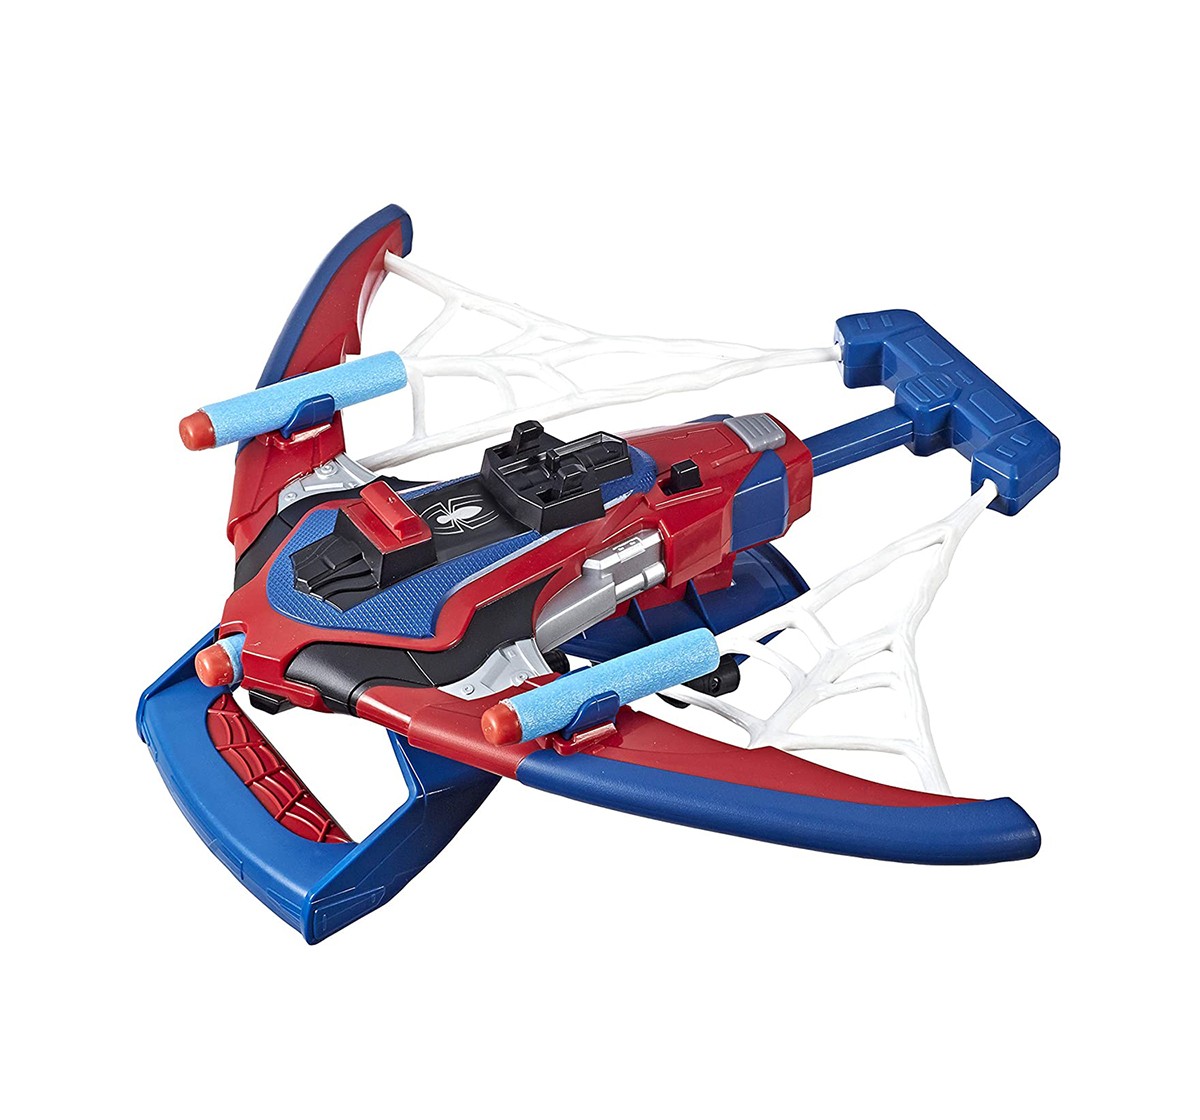 Marvel Spider-Man Web Shots Spiderbolt NERF Powered Blaster Toy, Fires Darts, Includes 3 Darts, For Kids Ages 5 and Up Action Figure Play Sets for age 5Y+ 